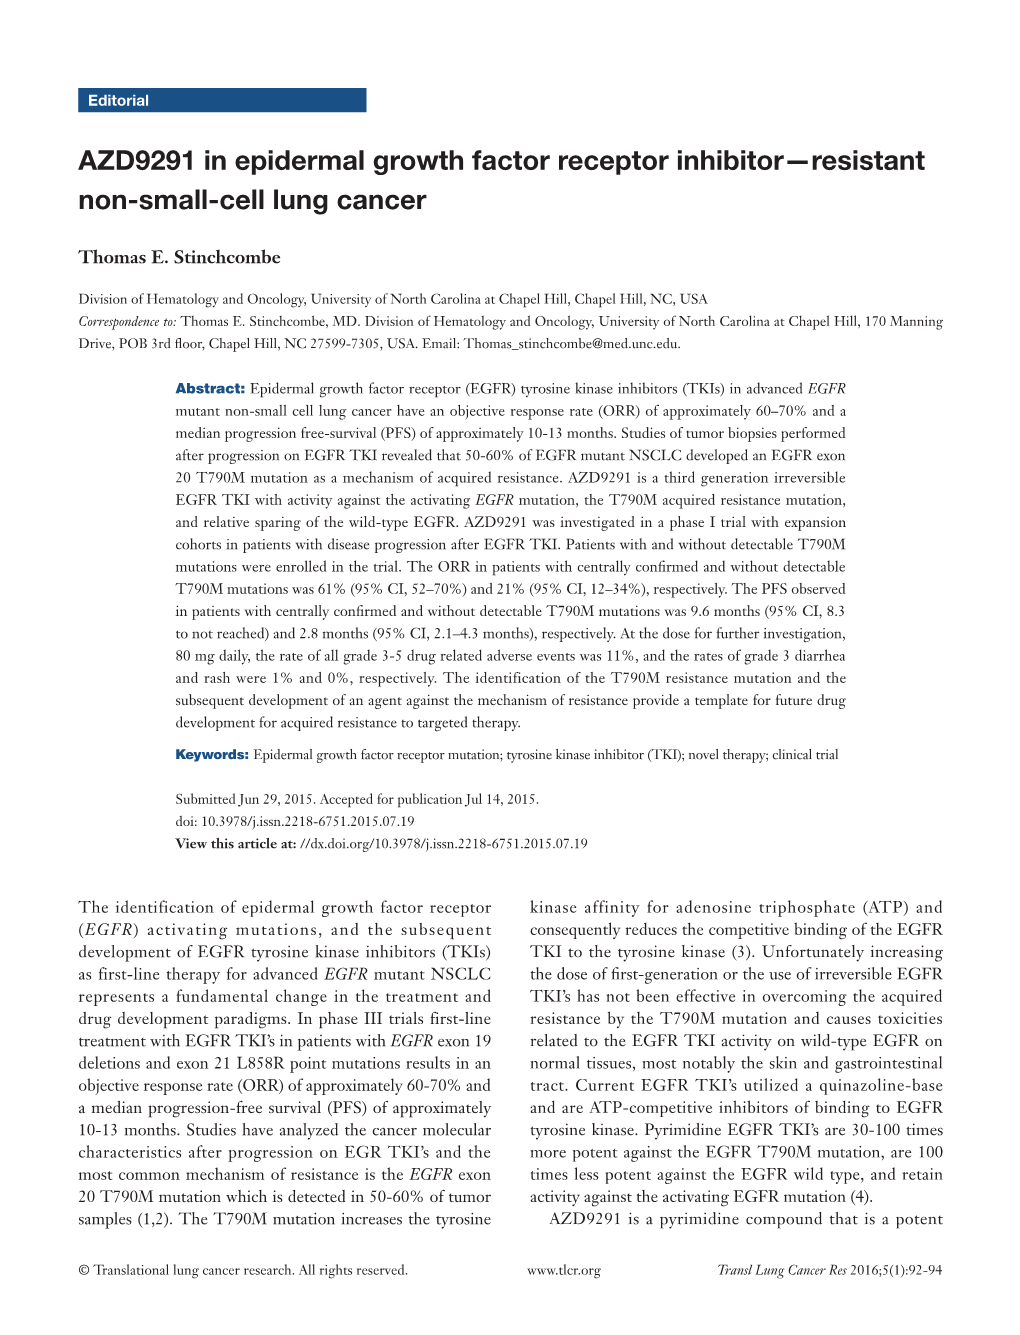 AZD9291 in Epidermal Growth Factor Receptor Inhibitor—Resistant Non-Small-Cell Lung Cancer